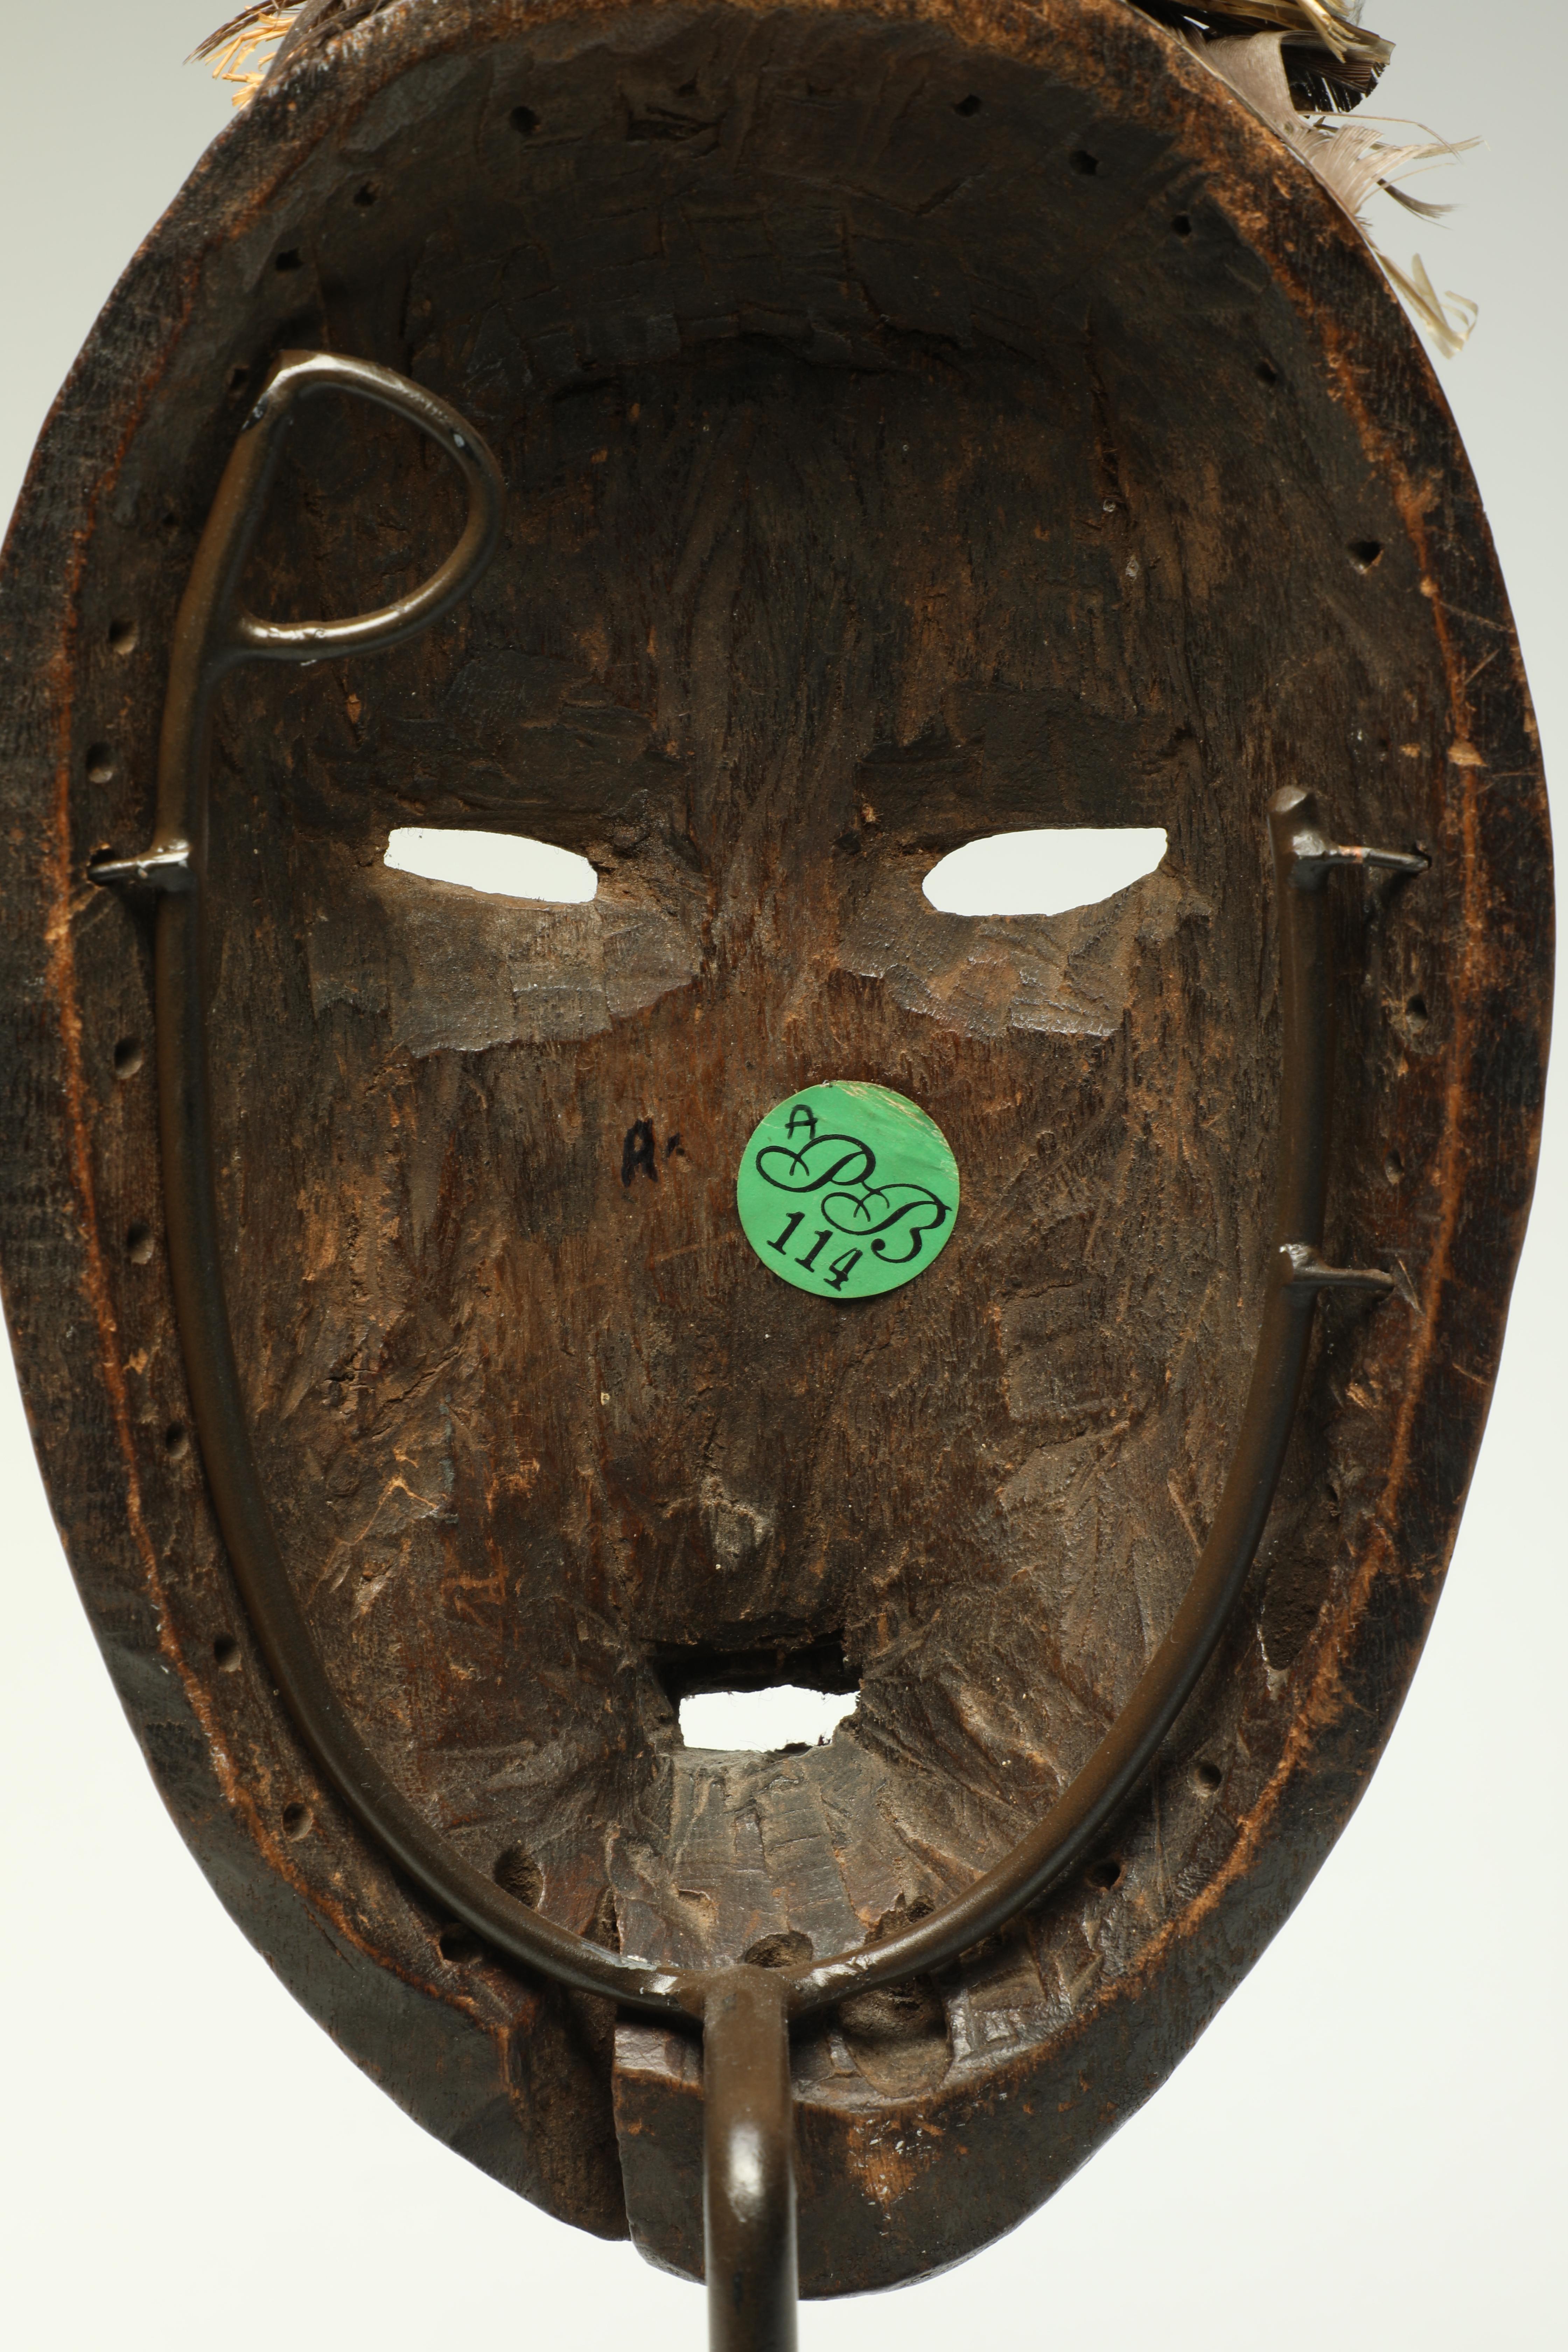 Expressive Early Classic Cubist Dan Mask Early 20th Century Liberia, Africa For Sale 1